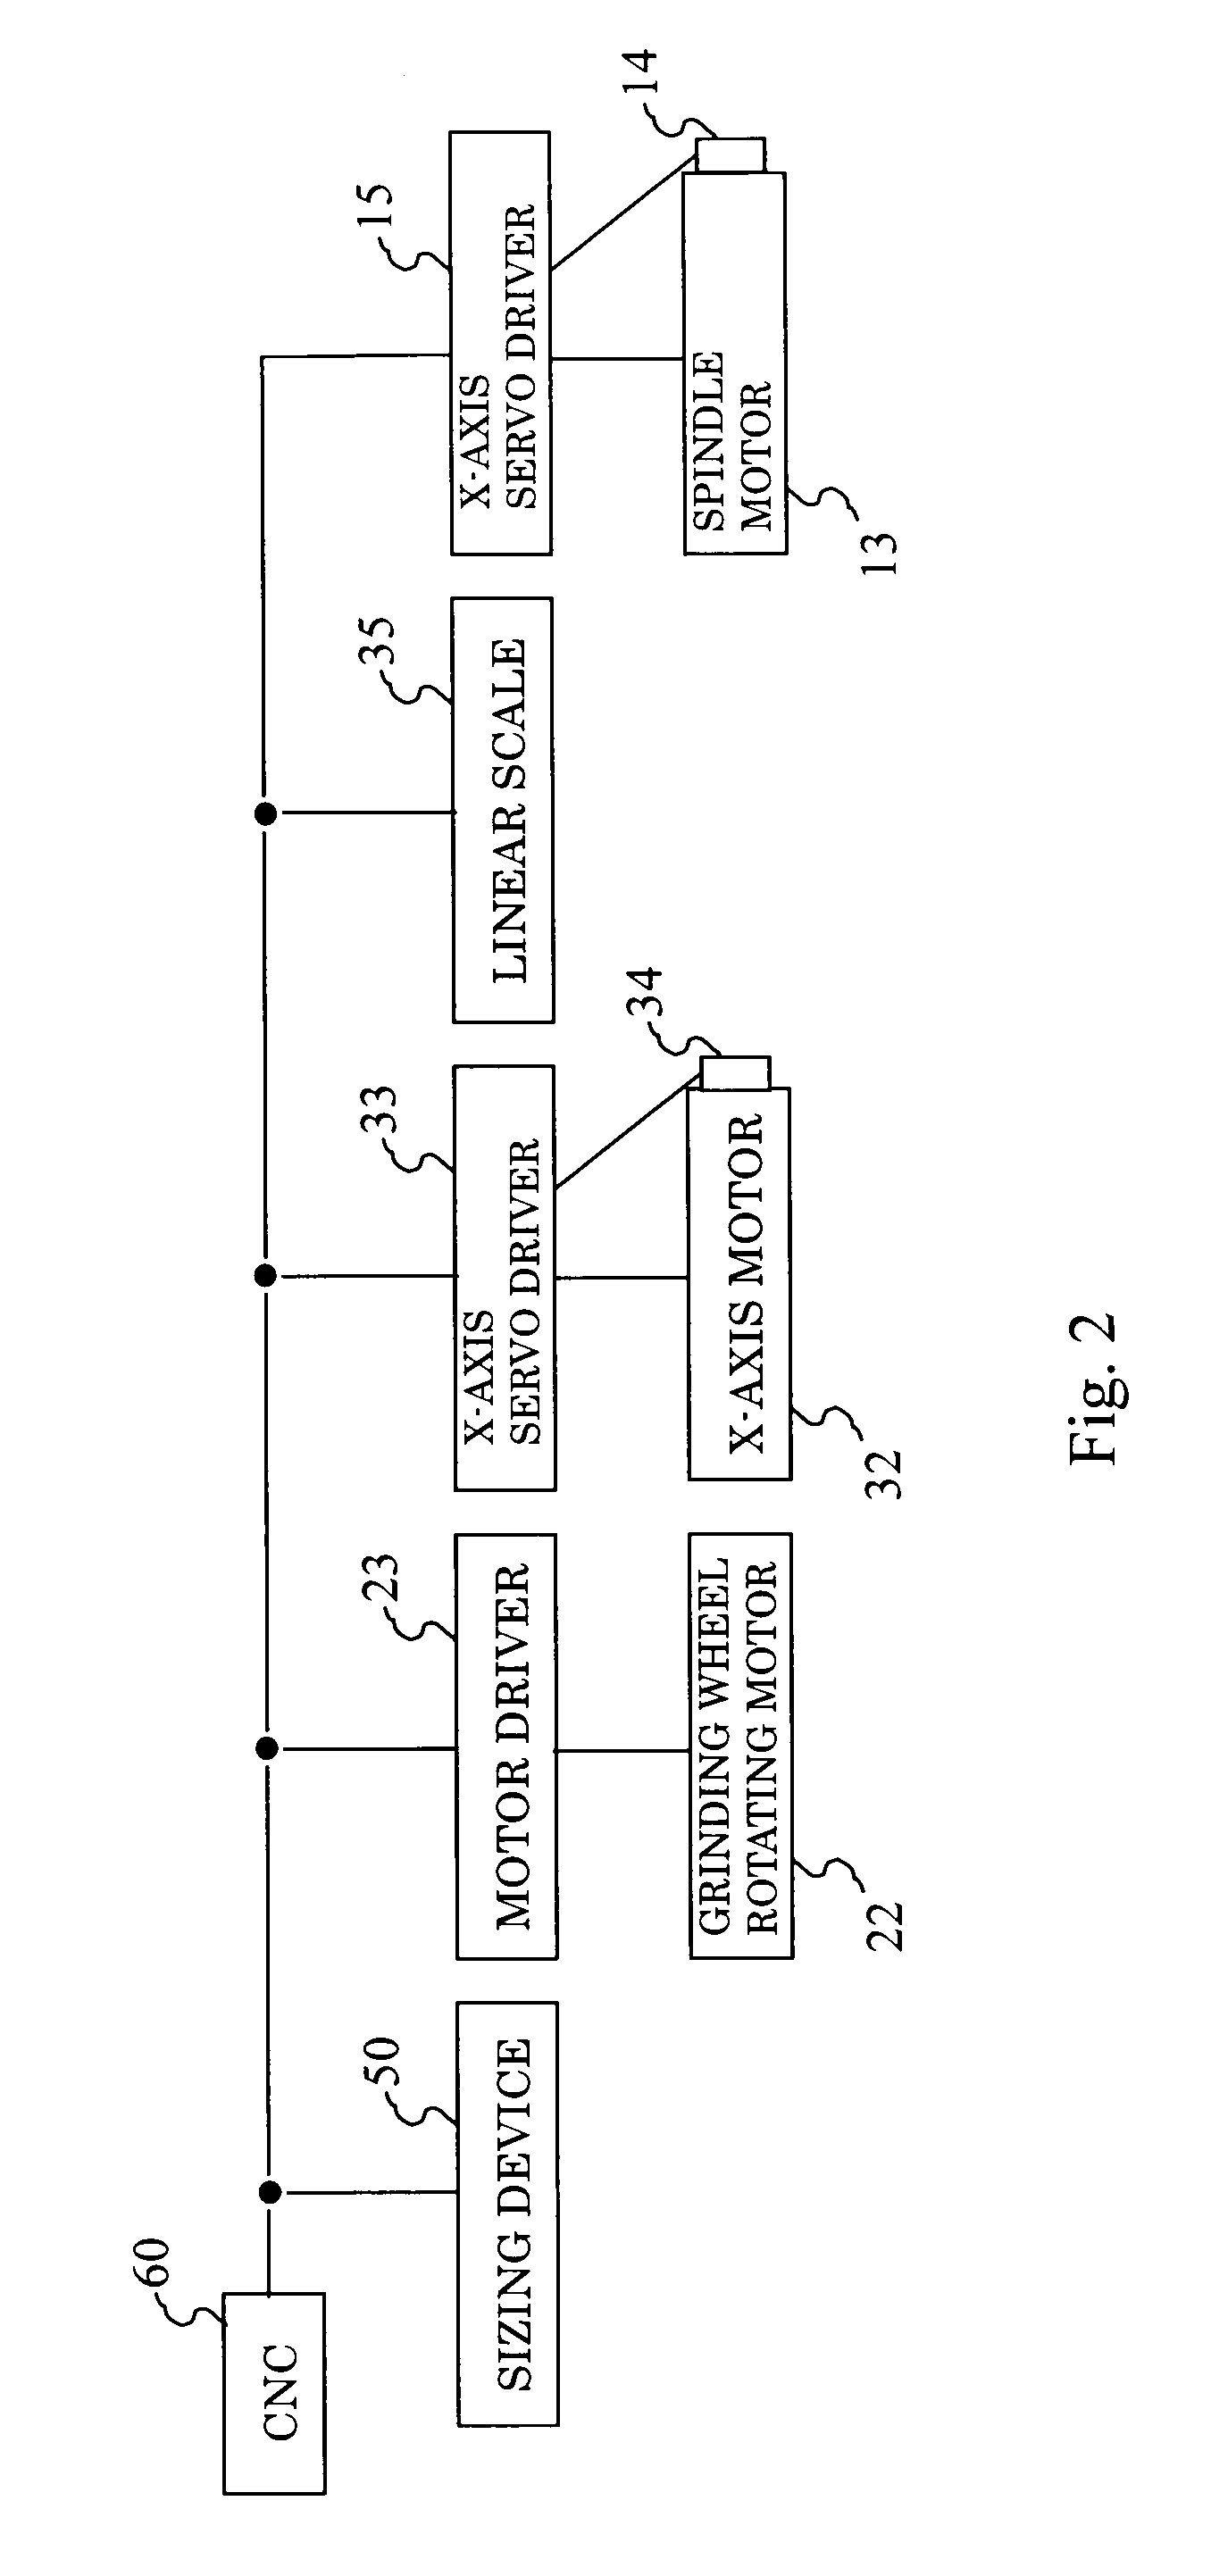 Machine tool and controlling method thereof